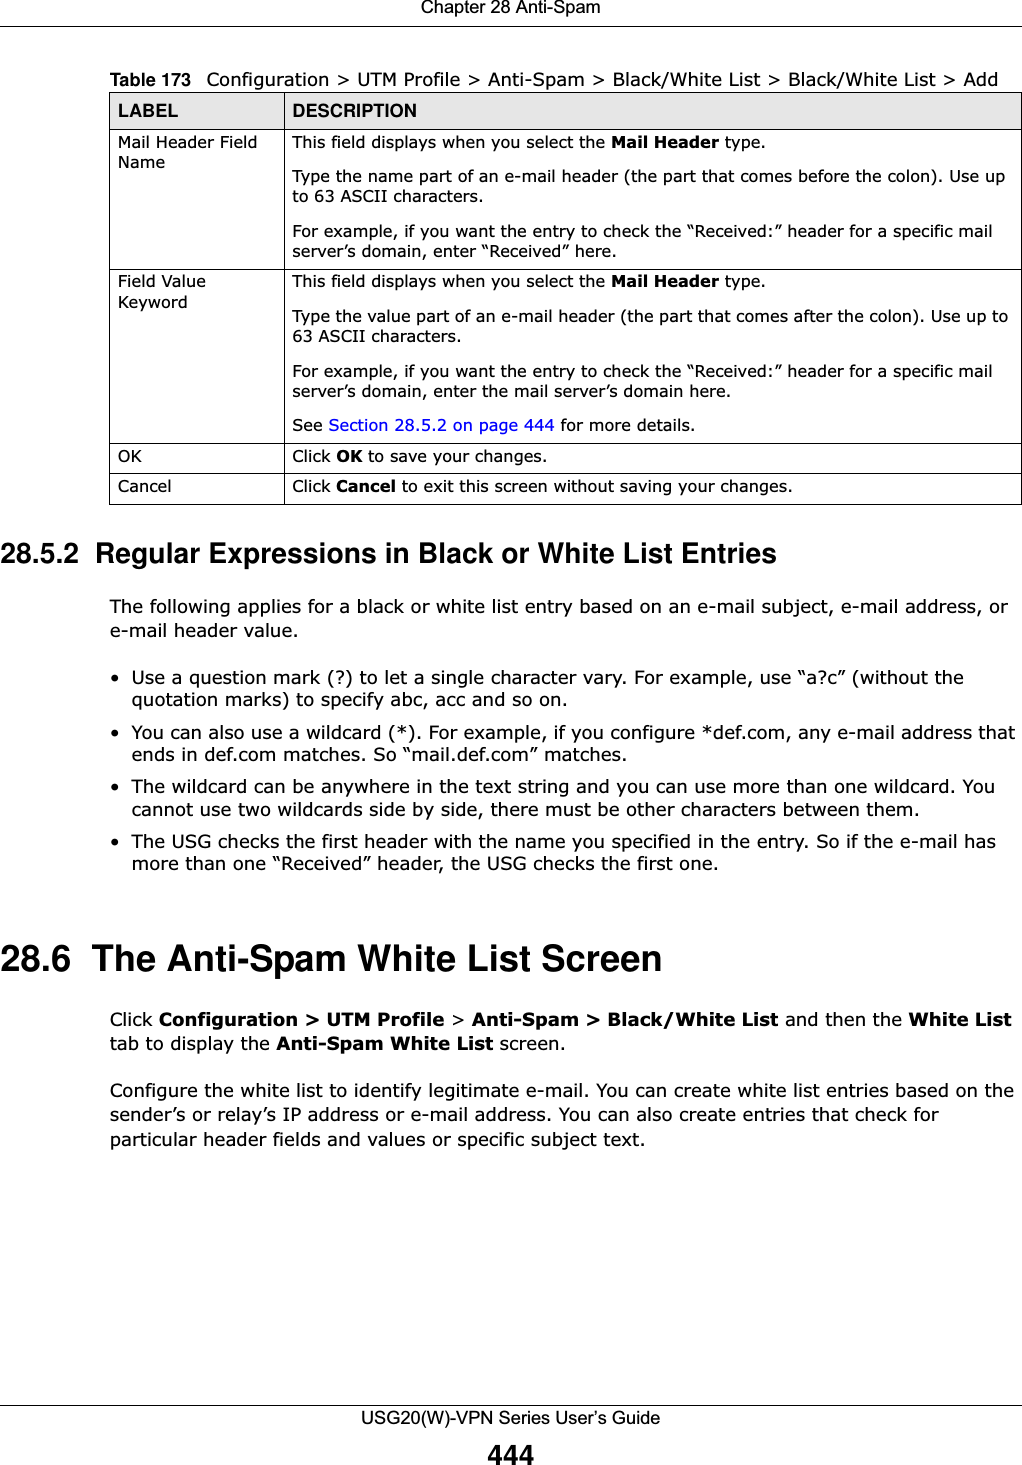 Chapter 28 Anti-SpamUSG20(W)-VPN Series User’s Guide44428.5.2  Regular Expressions in Black or White List EntriesThe following applies for a black or white list entry based on an e-mail subject, e-mail address, or e-mail header value.• Use a question mark (?) to let a single character vary. For example, use “a?c” (without the quotation marks) to specify abc, acc and so on. • You can also use a wildcard (*). For example, if you configure *def.com, any e-mail address that ends in def.com matches. So “mail.def.com” matches.• The wildcard can be anywhere in the text string and you can use more than one wildcard. You cannot use two wildcards side by side, there must be other characters between them. • The USG checks the first header with the name you specified in the entry. So if the e-mail has more than one “Received” header, the USG checks the first one.28.6  The Anti-Spam White List ScreenClick Configuration &gt; UTM Profile &gt; Anti-Spam &gt; Black/White List and then the White List tab to display the Anti-Spam White List screen. Configure the white list to identify legitimate e-mail. You can create white list entries based on the sender’s or relay’s IP address or e-mail address. You can also create entries that check for particular header fields and values or specific subject text. Mail Header Field NameThis field displays when you select the Mail Header type.Type the name part of an e-mail header (the part that comes before the colon). Use up to 63 ASCII characters. For example, if you want the entry to check the “Received:” header for a specific mail server’s domain, enter “Received” here.Field Value KeywordThis field displays when you select the Mail Header type.Type the value part of an e-mail header (the part that comes after the colon). Use up to 63 ASCII characters.For example, if you want the entry to check the “Received:” header for a specific mail server’s domain, enter the mail server’s domain here.See Section 28.5.2 on page 444 for more details.OK Click OK to save your changes. Cancel Click Cancel to exit this screen without saving your changes.Table 173   Configuration &gt; UTM Profile &gt; Anti-Spam &gt; Black/White List &gt; Black/White List &gt; Add LABEL DESCRIPTION